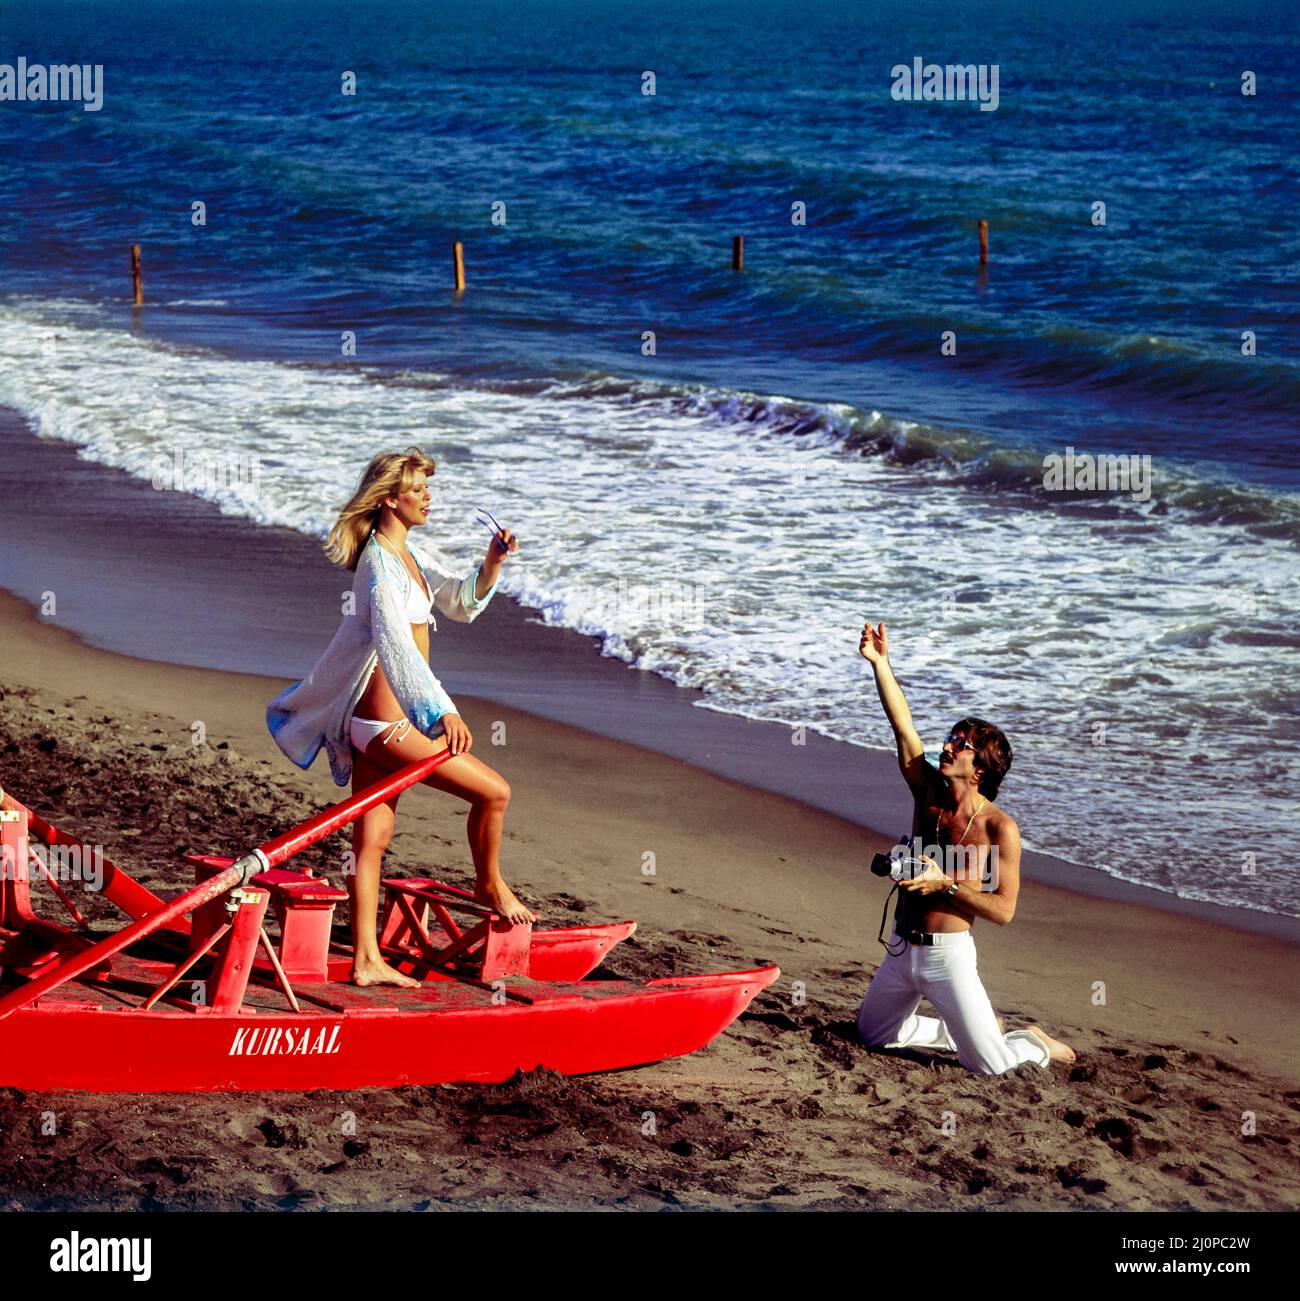 Vintage Italy 1970s, photographer shooting pictures, female fashion model, red rowing rescue boat, Kursaal beach, Lido di Ostia, Lazio, Europe, Stock Photo